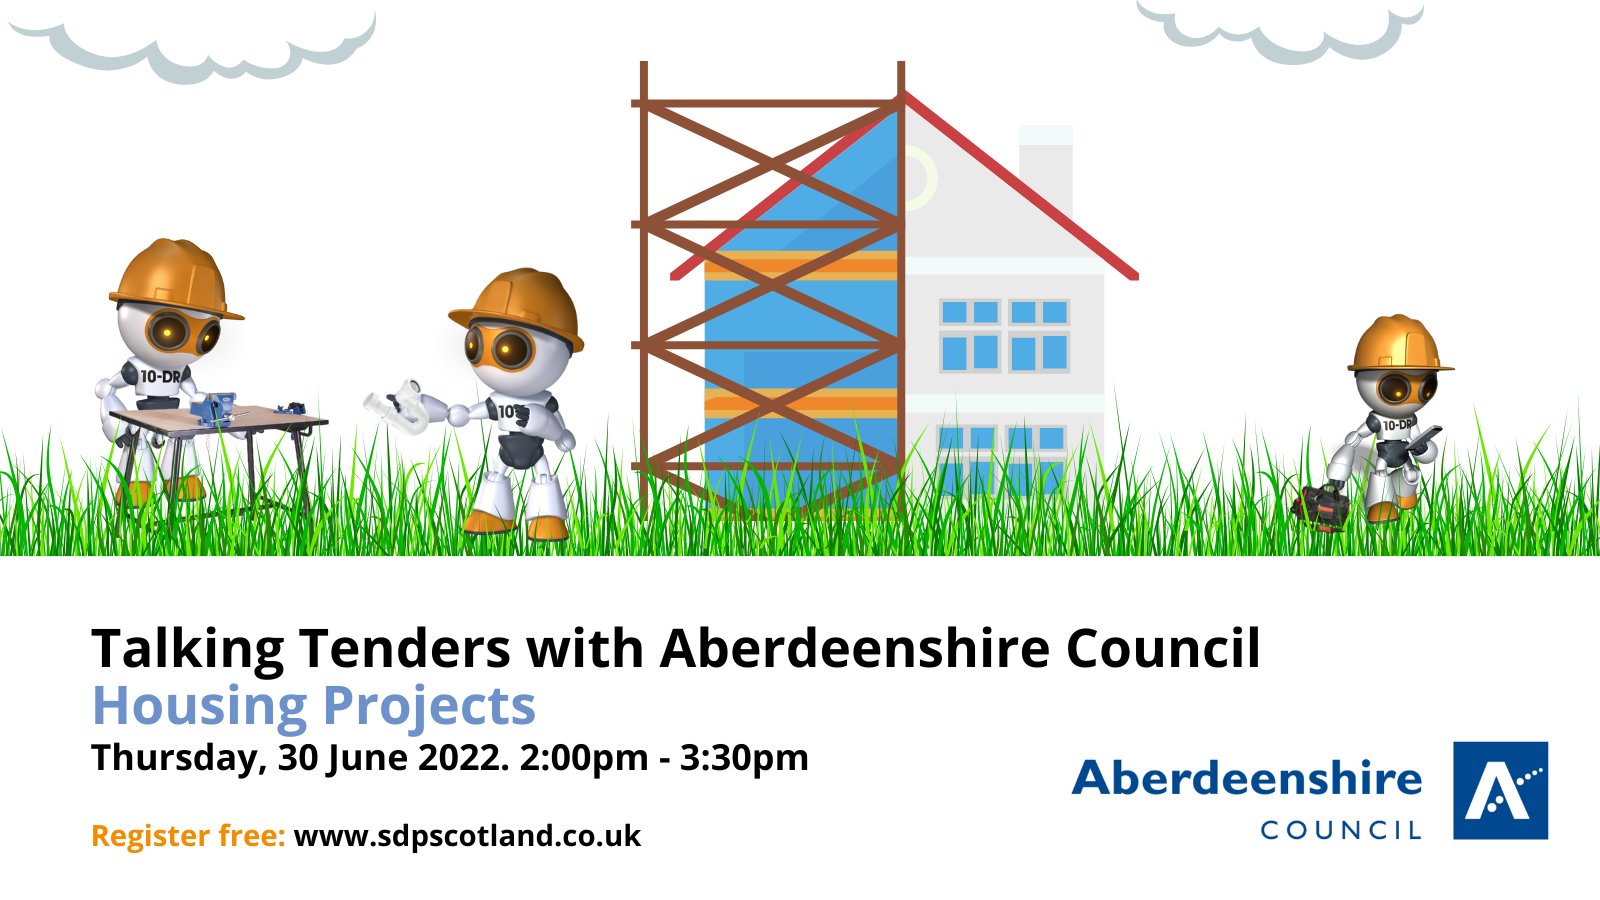 Construction businesses wanted for housing projects with Aberdeenshire Council